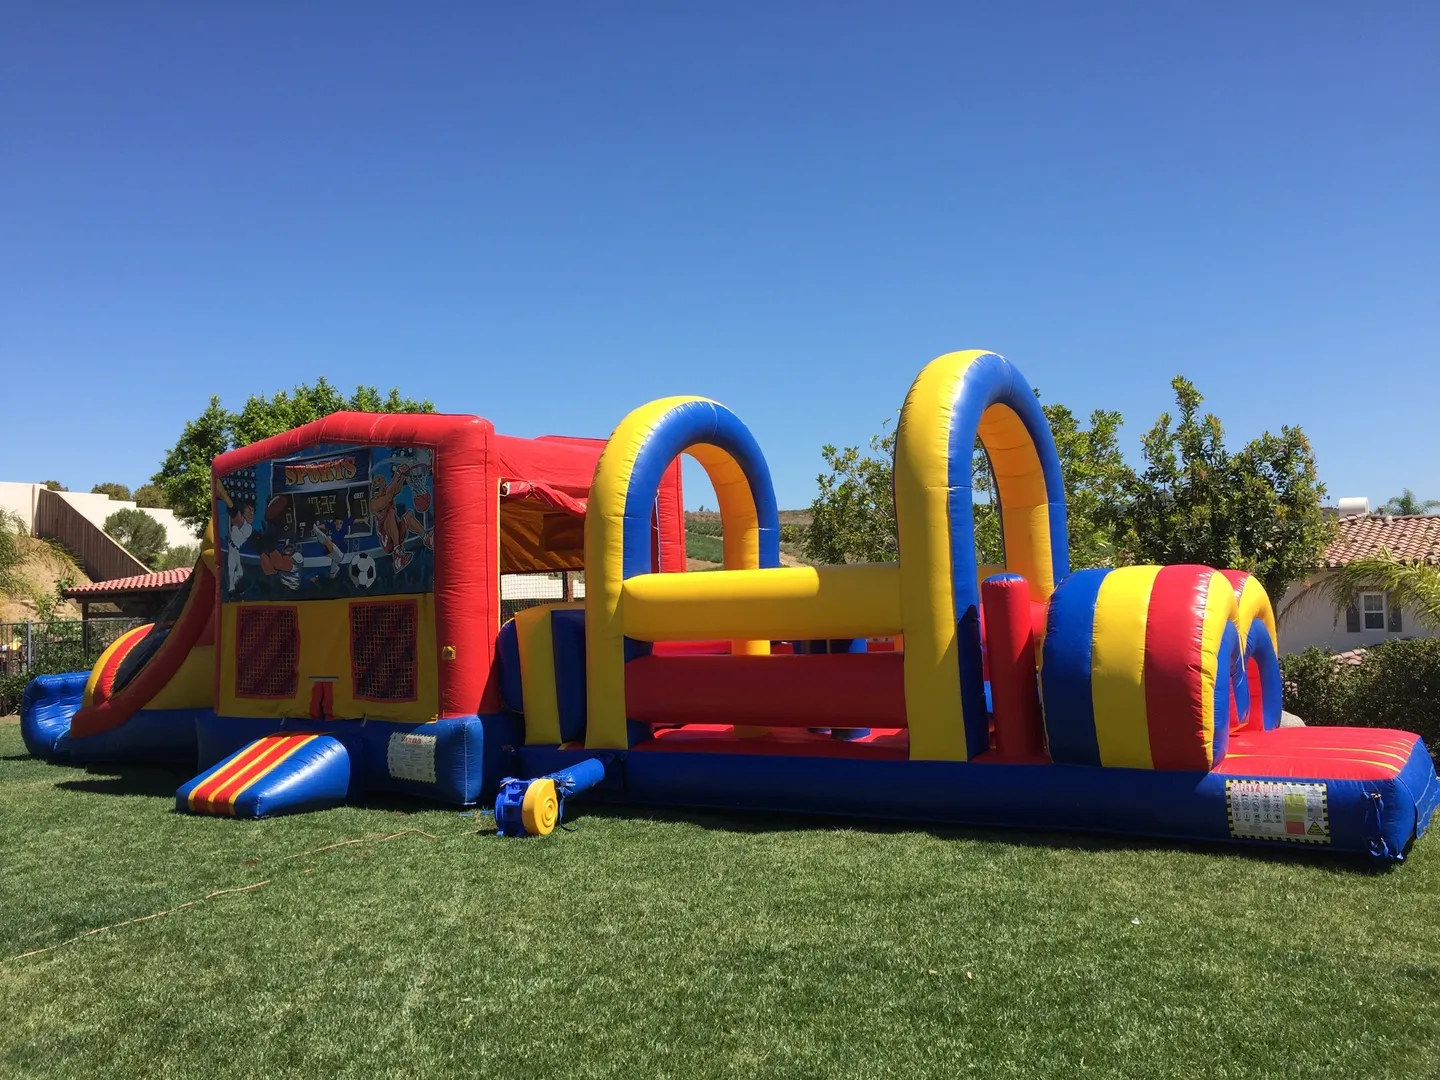 A large inflatable obstacle course set up in the grass.